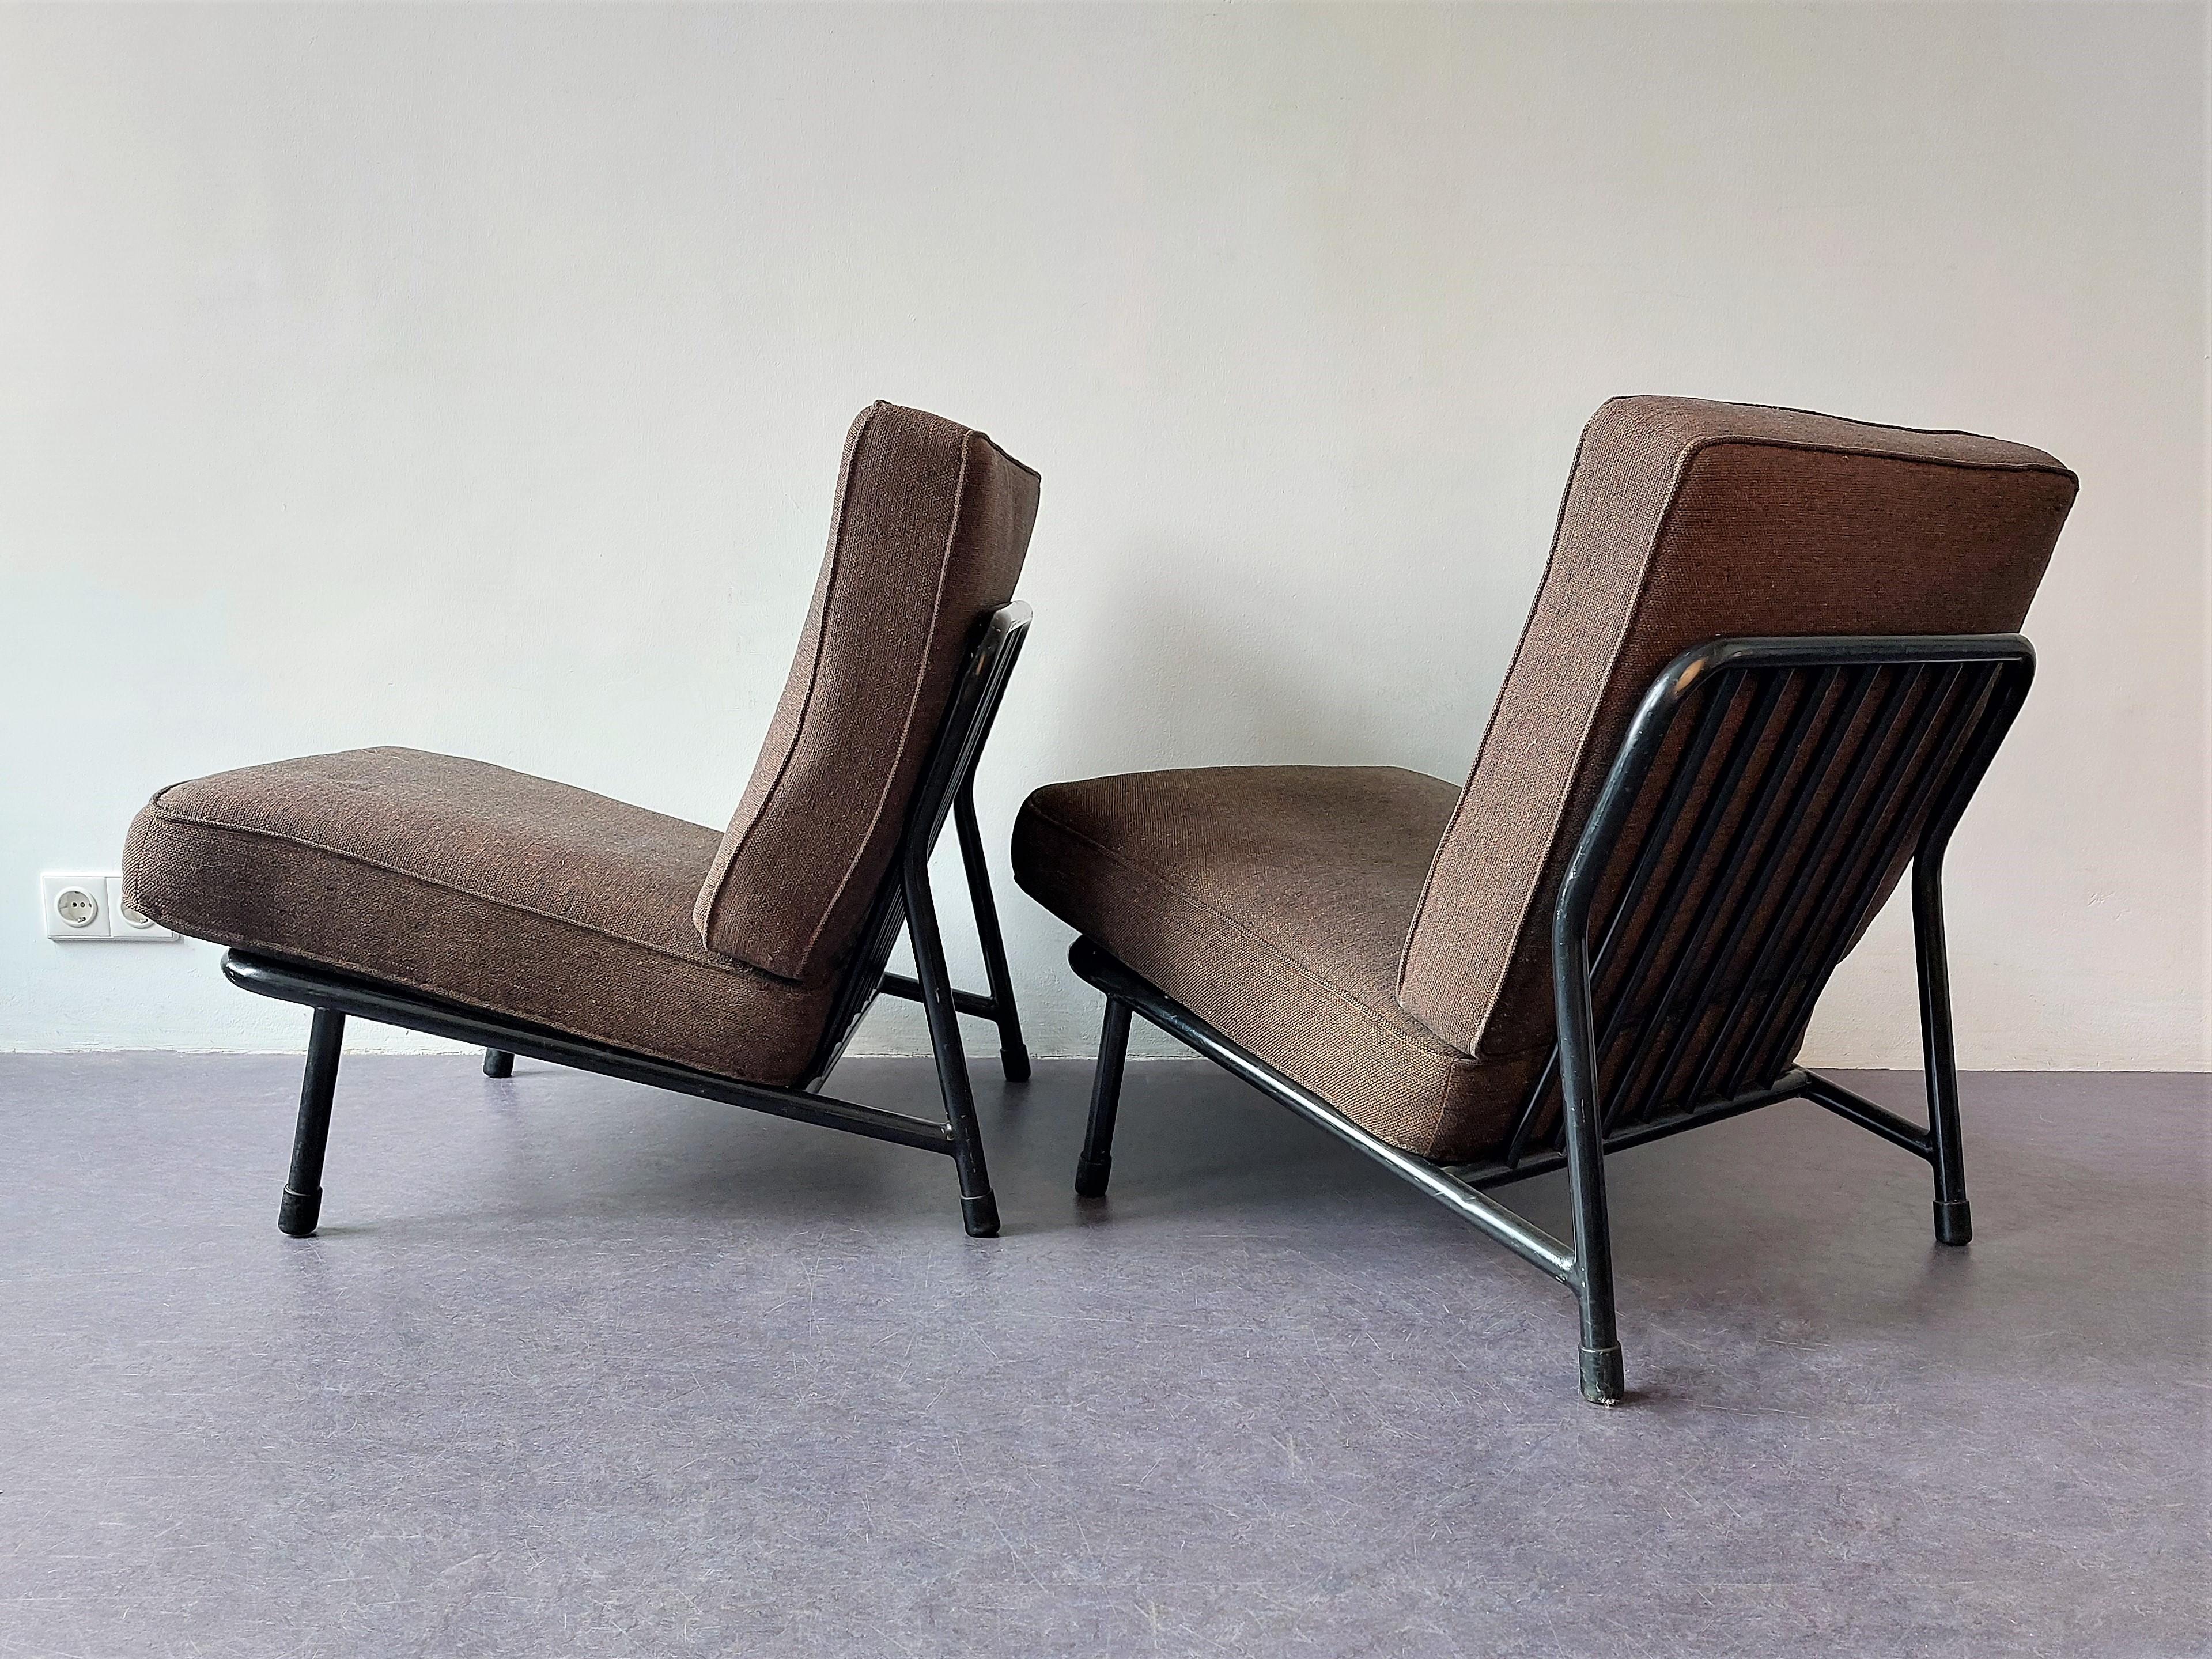 This lounge chair was designed by Alf Svensson for DUX in Sweden in the late 1950's or early 1960's. These metal versions were sold by Artifort in the Netherlands. This is why they are sometimes credited to Artifort. It has an airy black metal frame